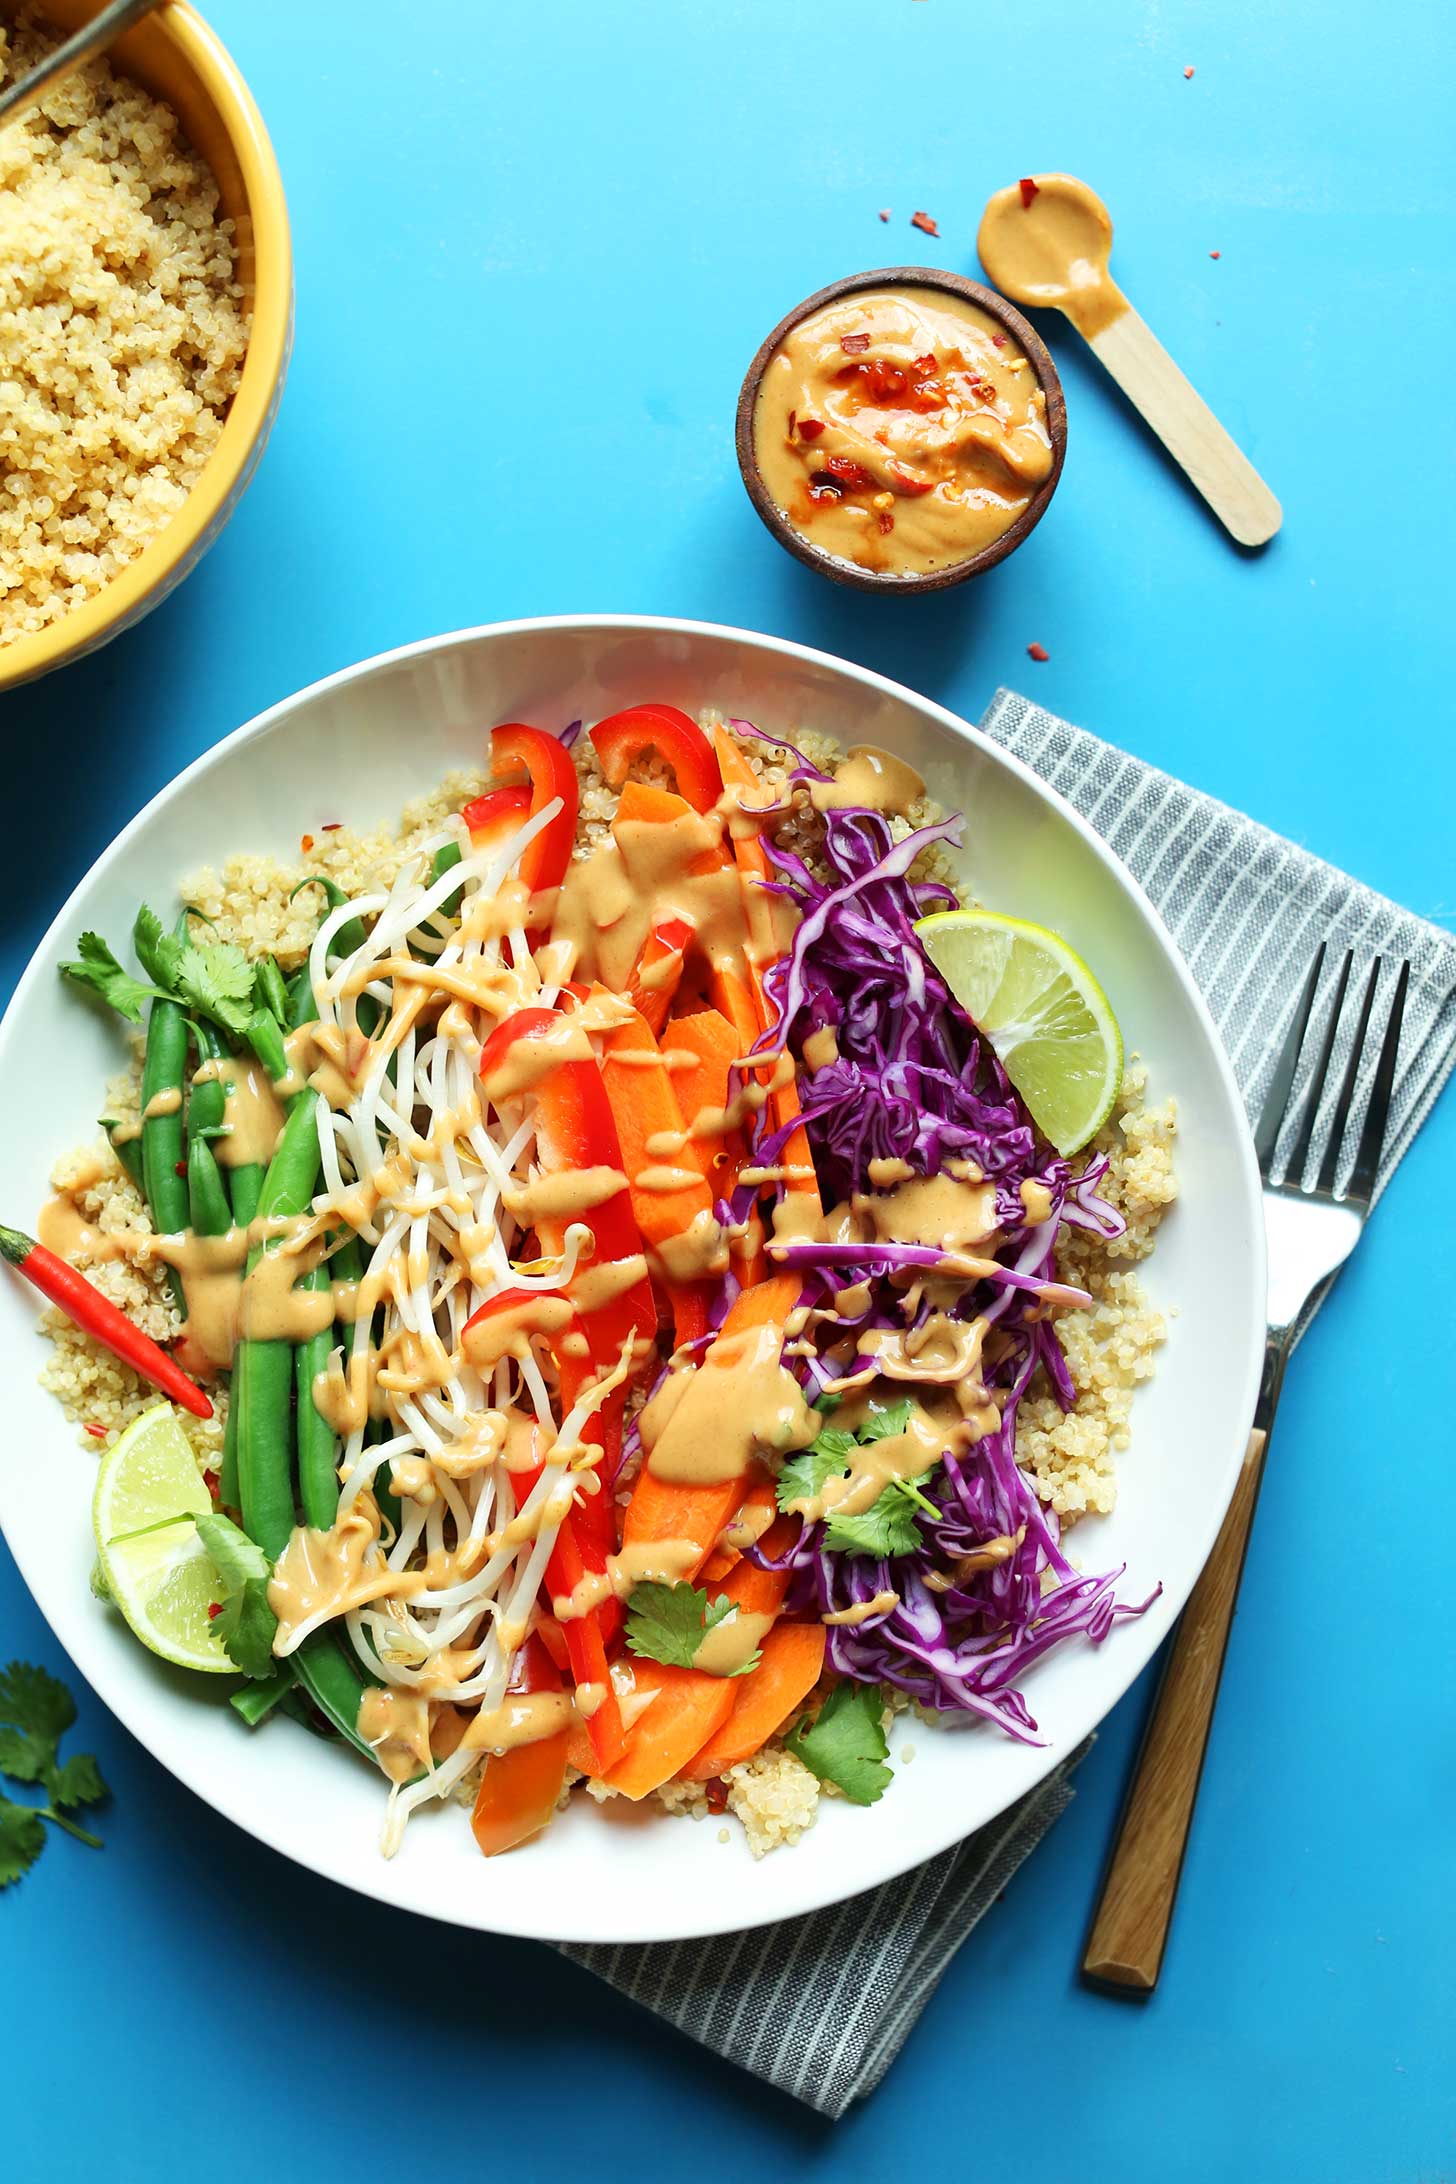 Hearty serving of our delicious vegan dinner of Quinoa Gado-Gado with Veggies and Spicy Peanut Dressing